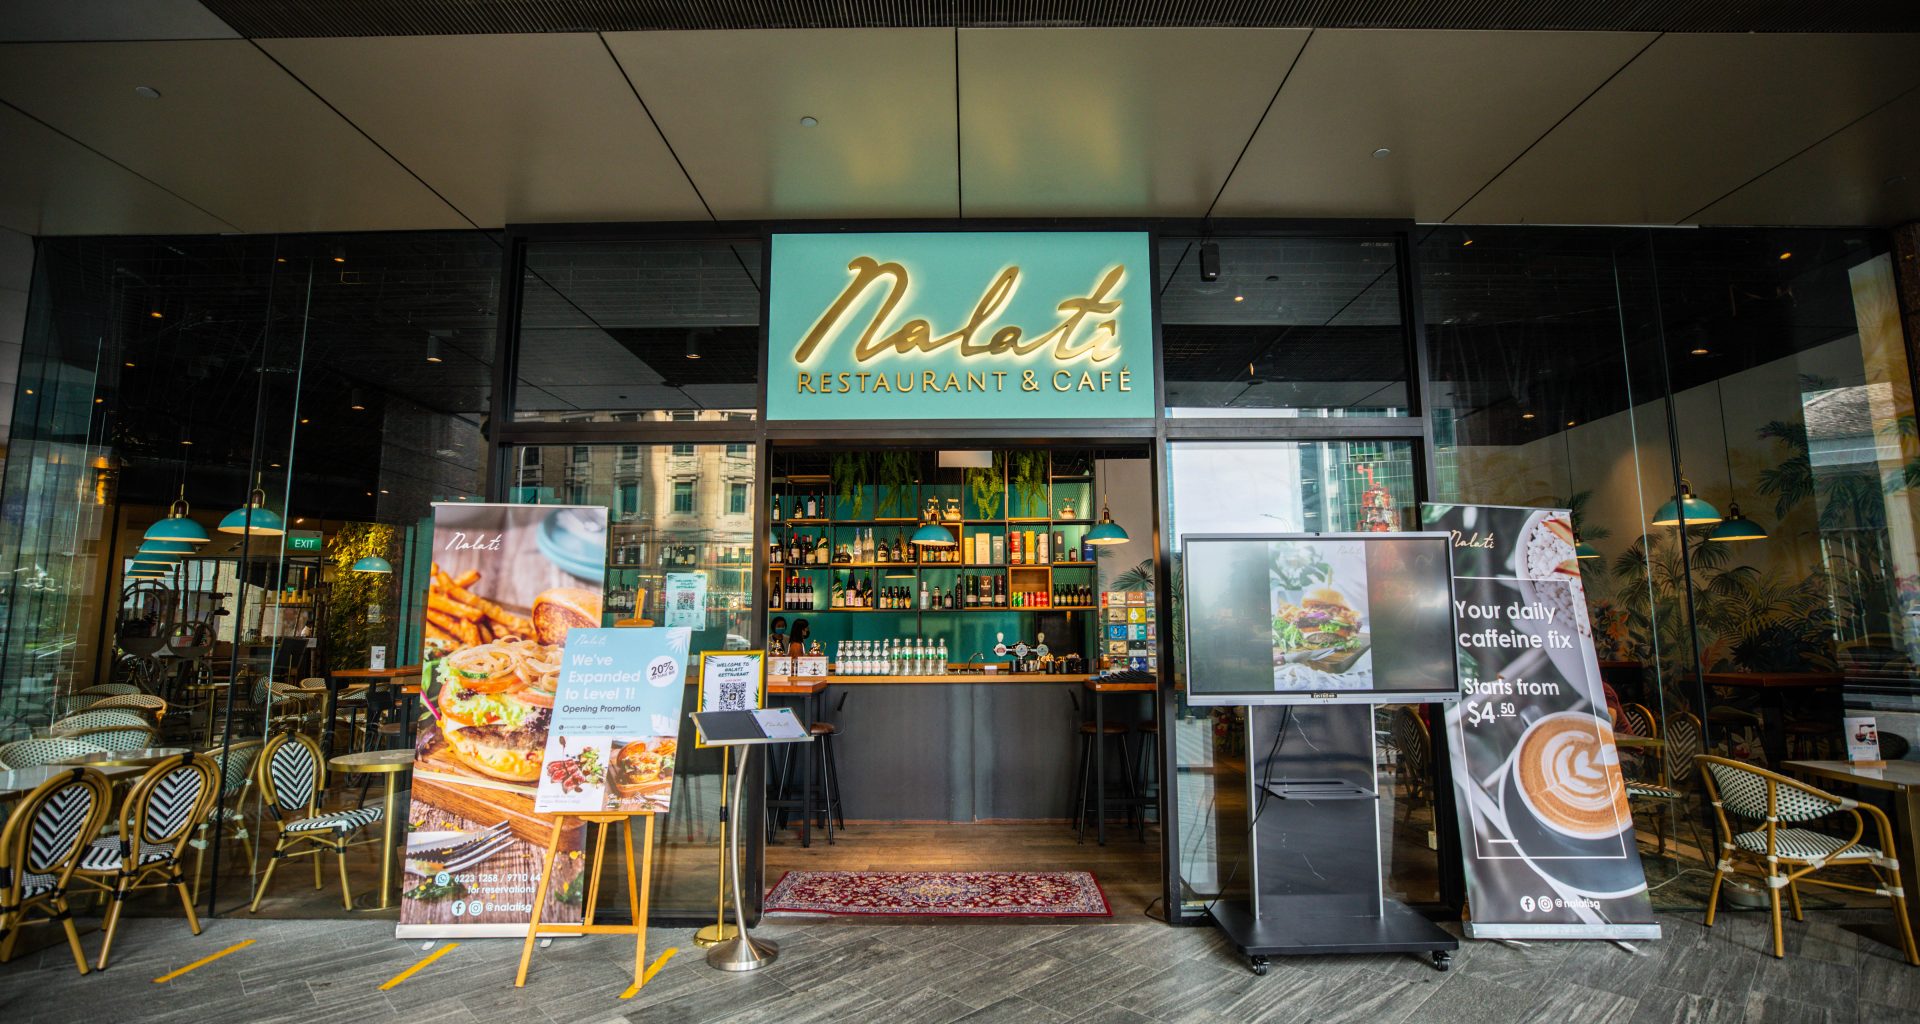 Garden-themed CBD Wonderland, Nalati Restaurant & Events Expands To Two Levels, Introduces new menu additions - Alvinology